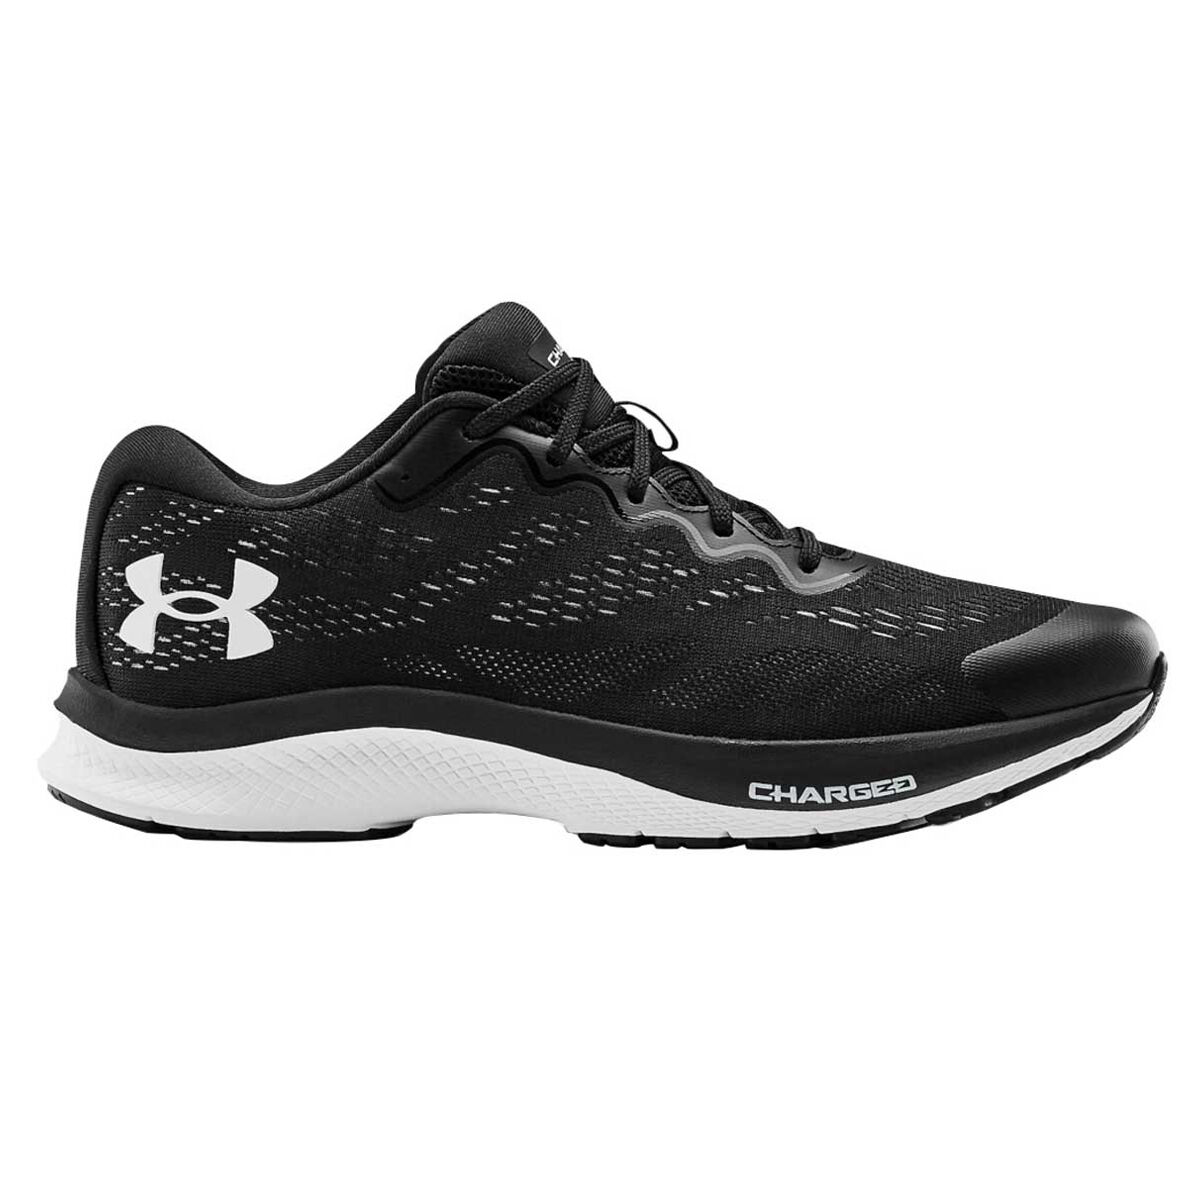 Under Armour Charged Bandit 6 Womens Running Shoes | Rebel Sport